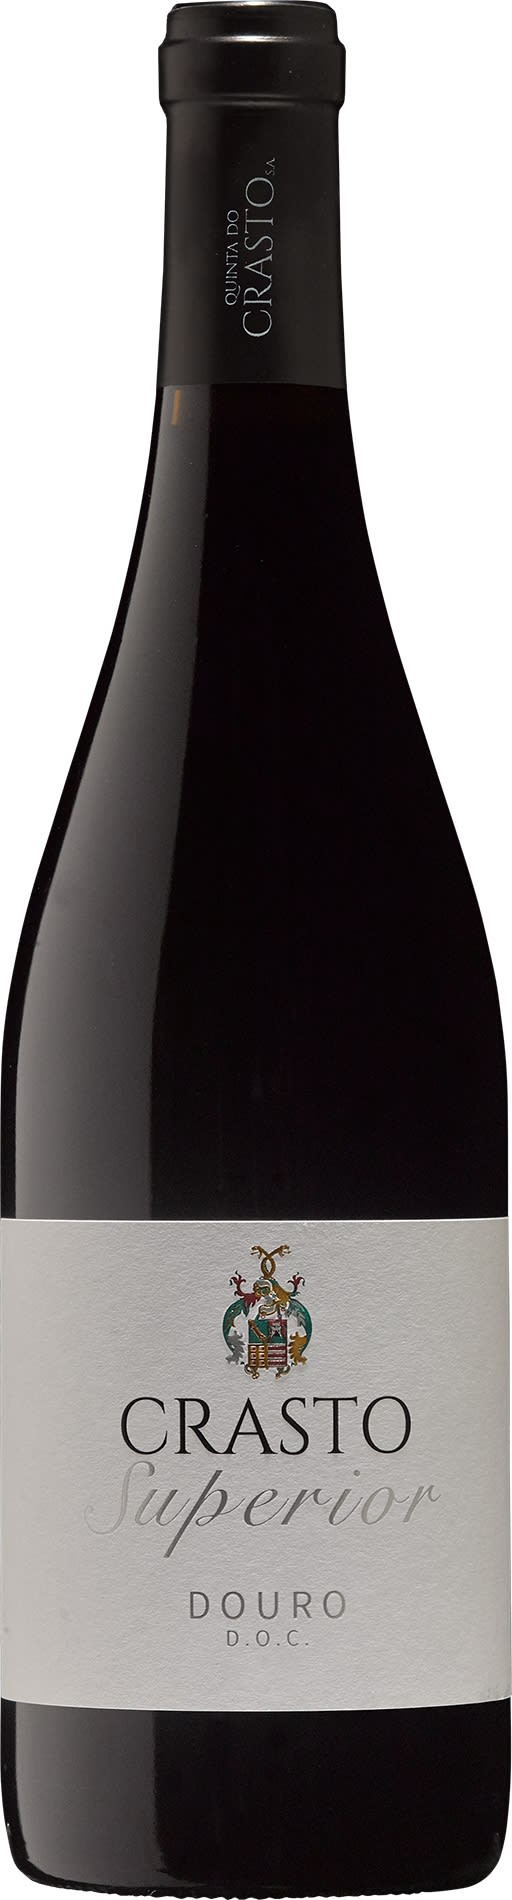 Quinta Do Crasto Superior Douro Red 2020 75cl - Buy Quinta Do Crasto Wines from GREAT WINES DIRECT wine shop